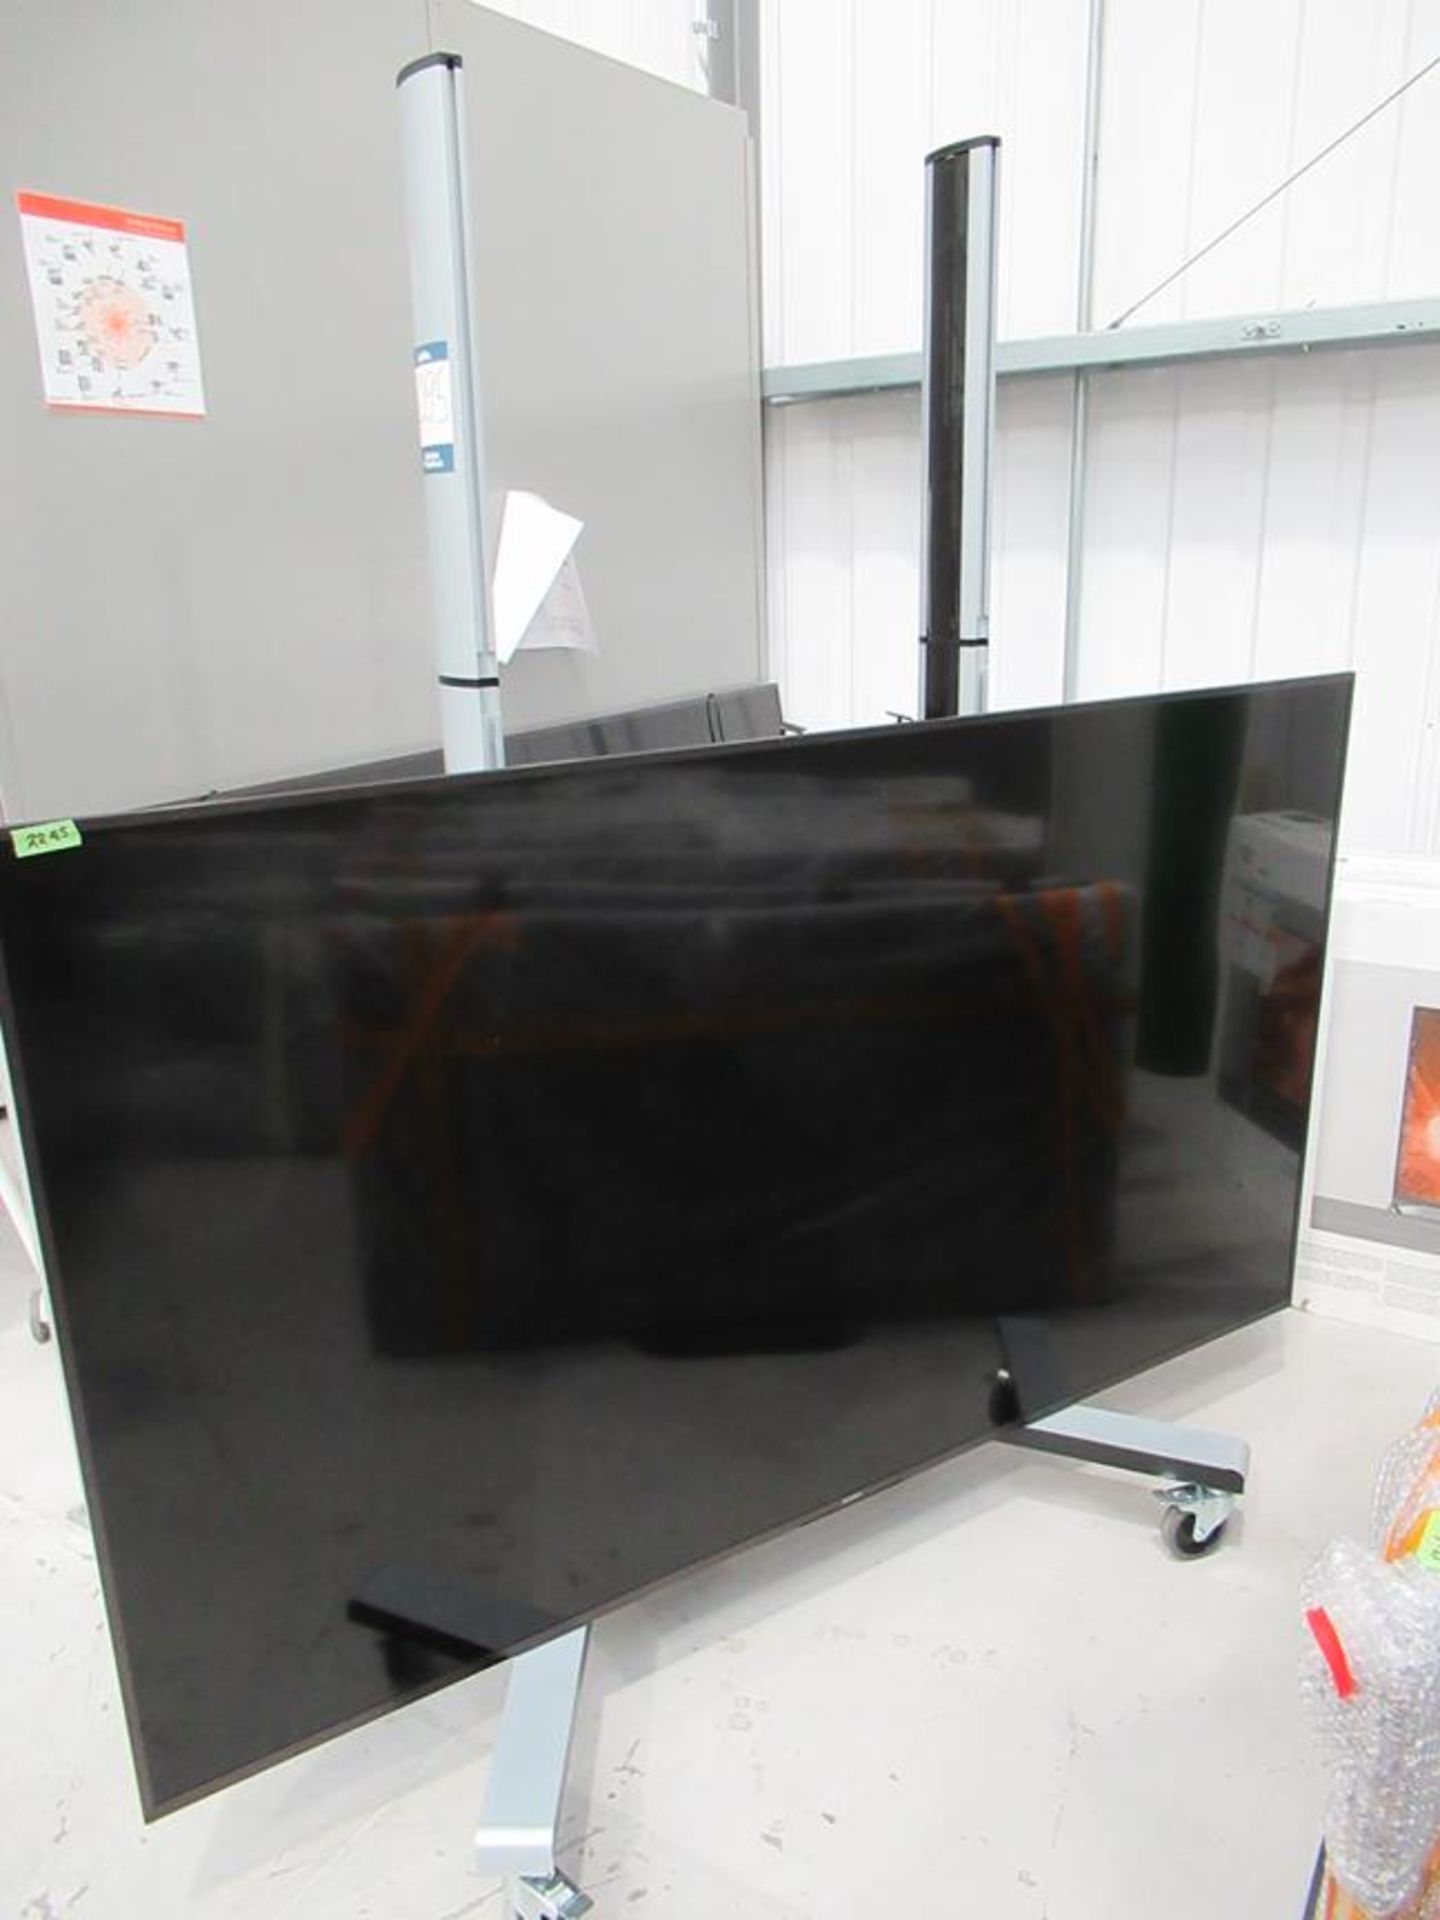 Sony, KD-85X85J 85" television on stand